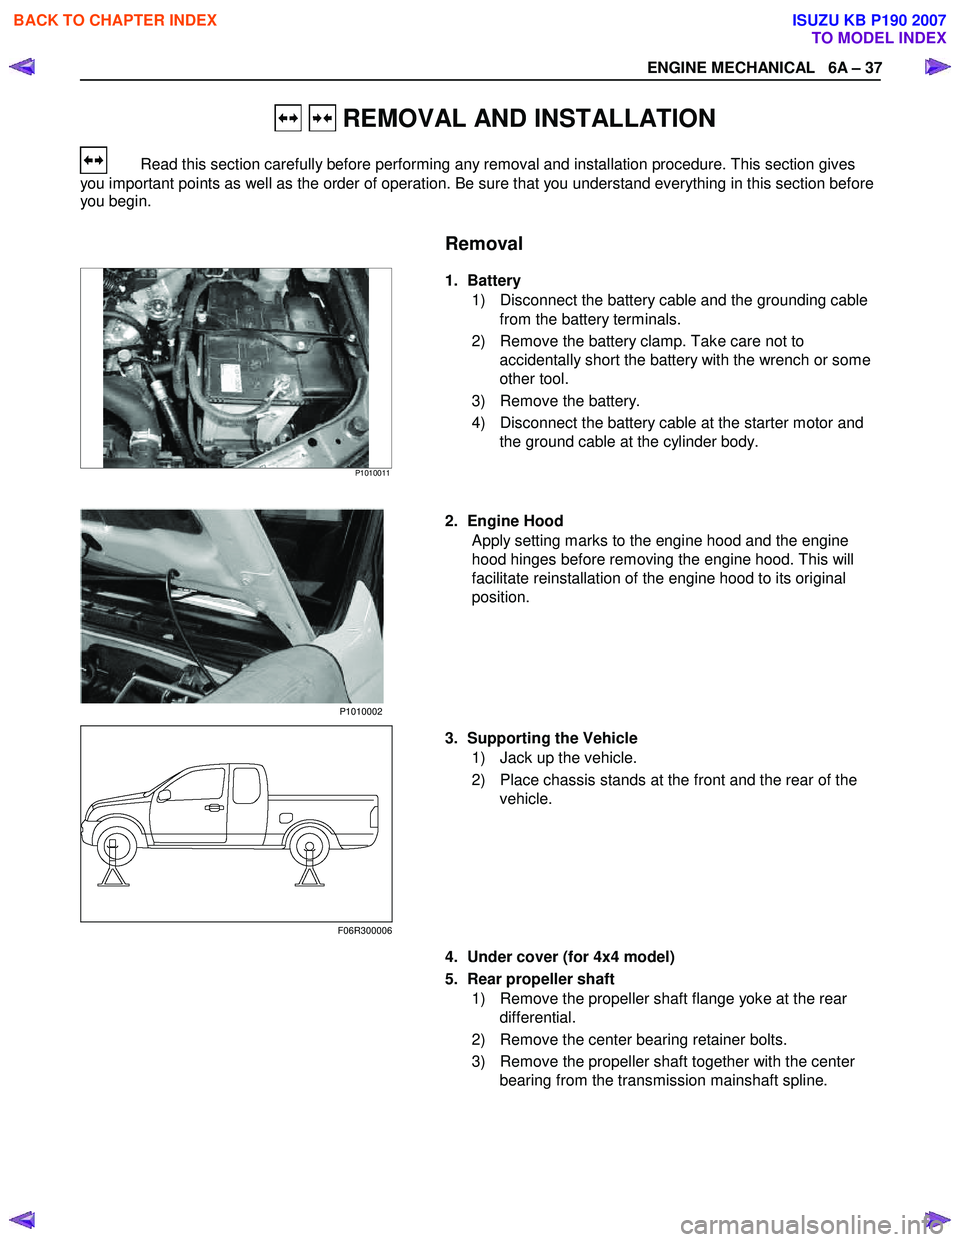 ISUZU KB P190 2007  Workshop Owners Manual ENGINE MECHANICAL   6A – 37 
 
   REMOVAL AND INSTALLATION 
   Read this section carefully before performing any removal and installation procedure. This section gives 
you important points as well 